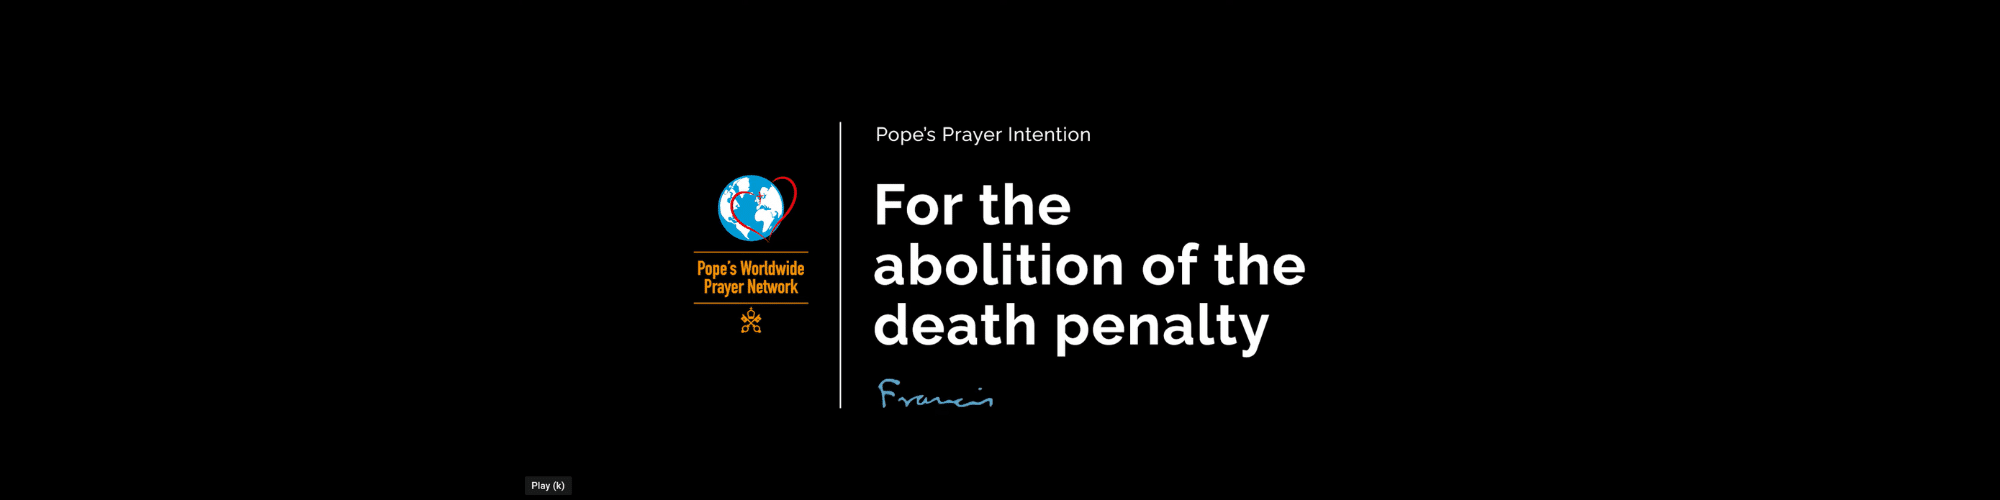 Pope's Prayer Intention for the Abolution of the Death Penalty